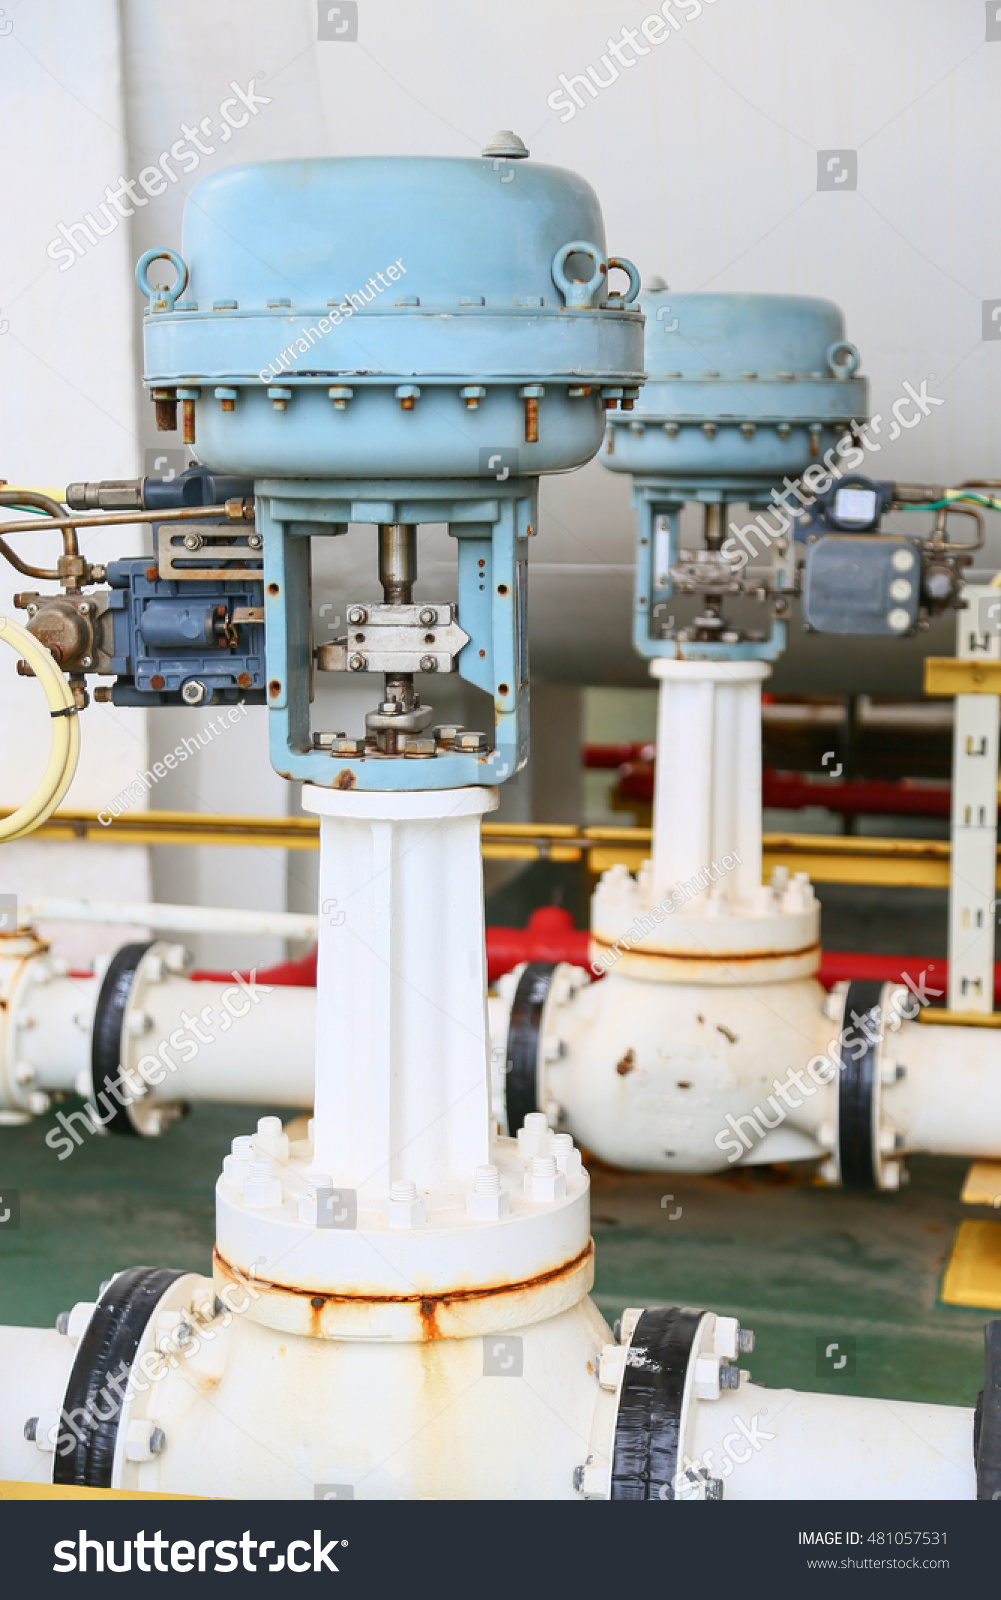 Pressure control valve in oil and gas process and controlled by Program Logic Control, PLC controller the valve and control instrument gas supply to actuator of the valve as PLC command. #481057531